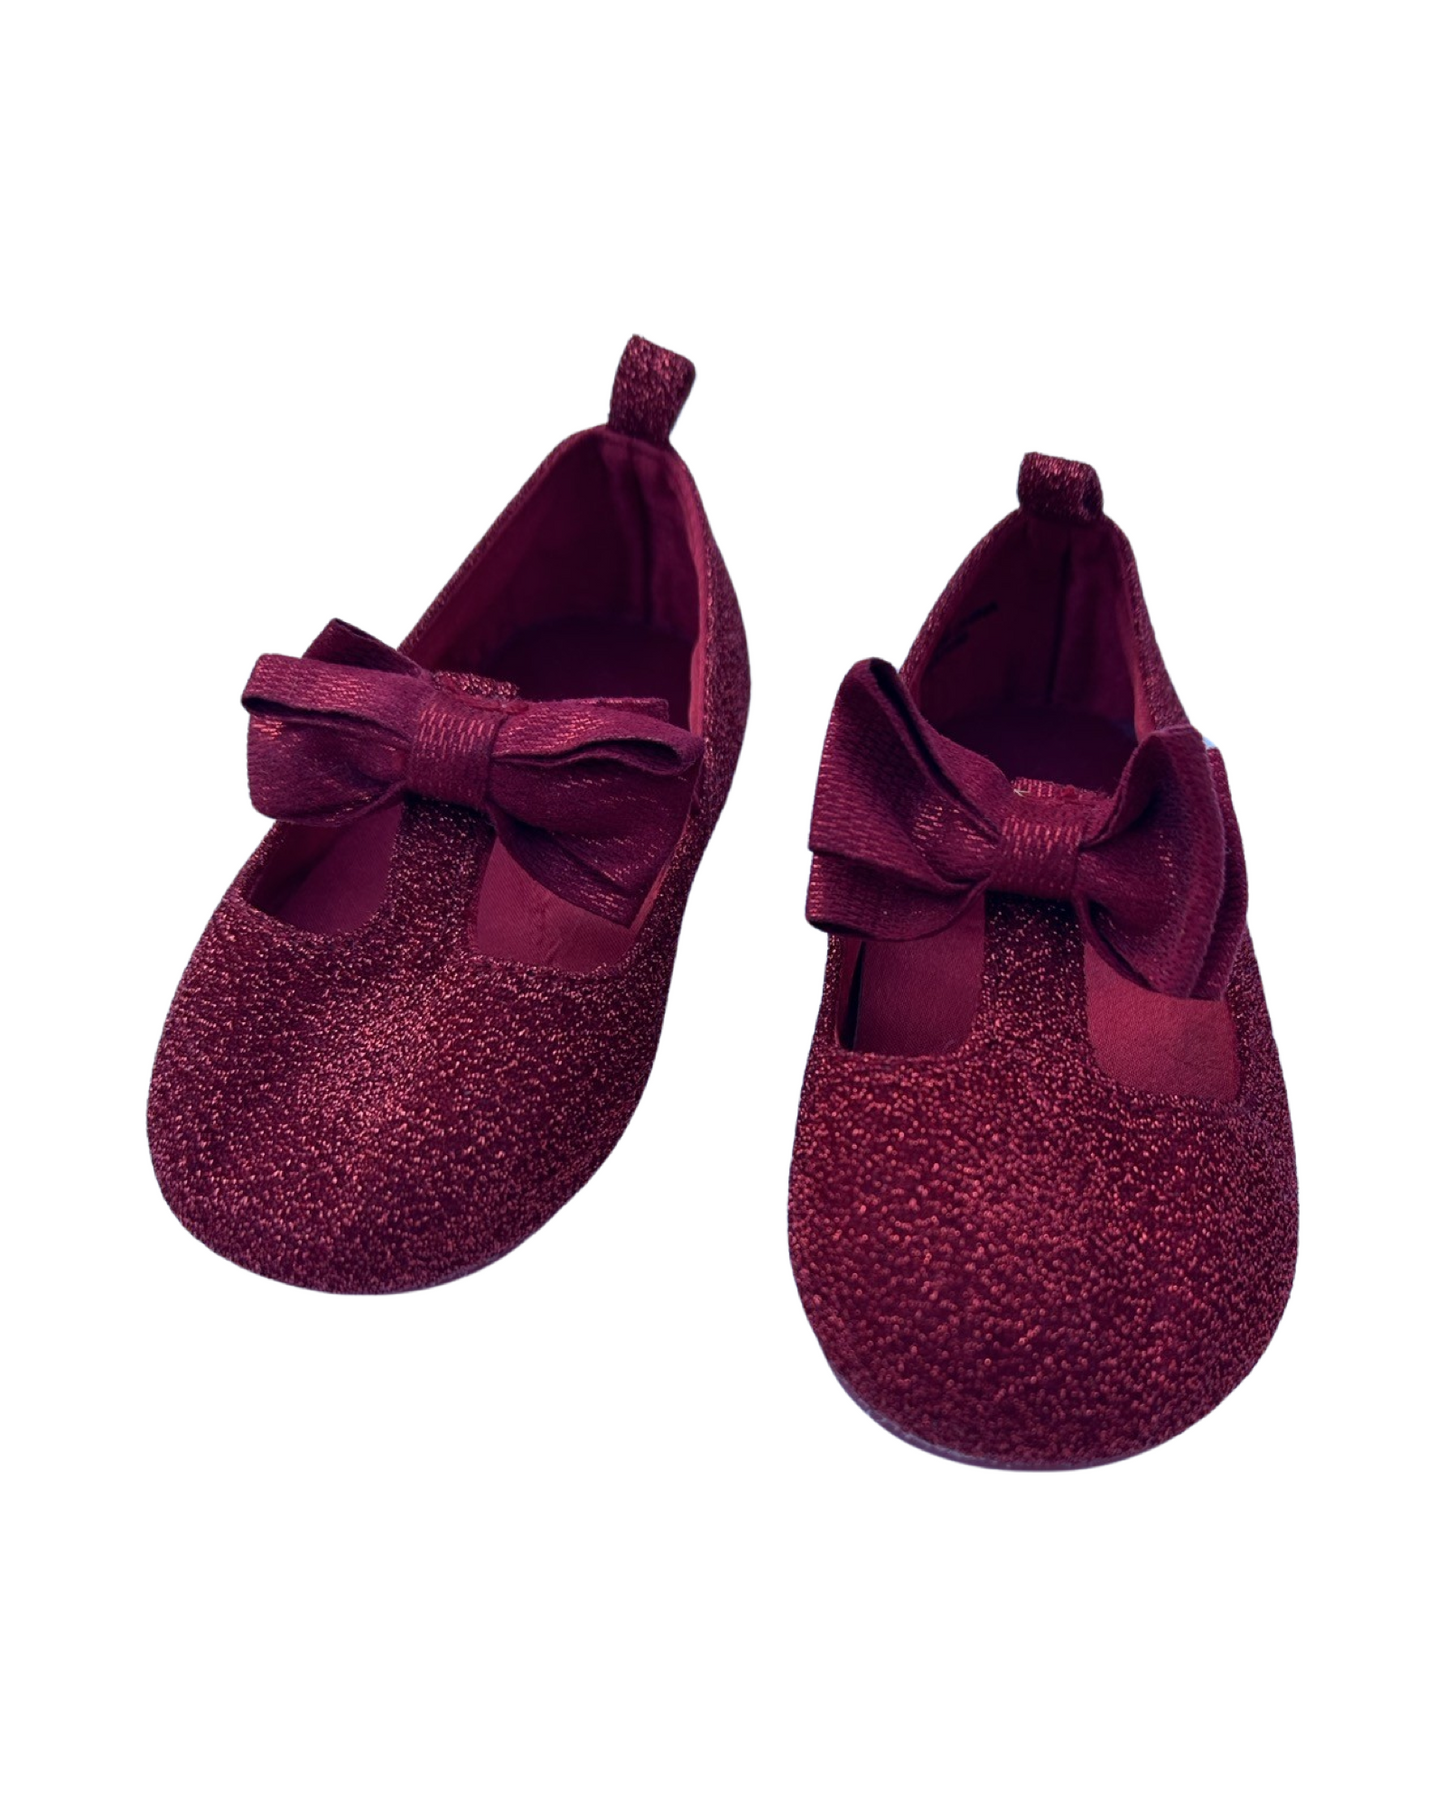 H&M red glittery bow shoes (size UK5/EU22)